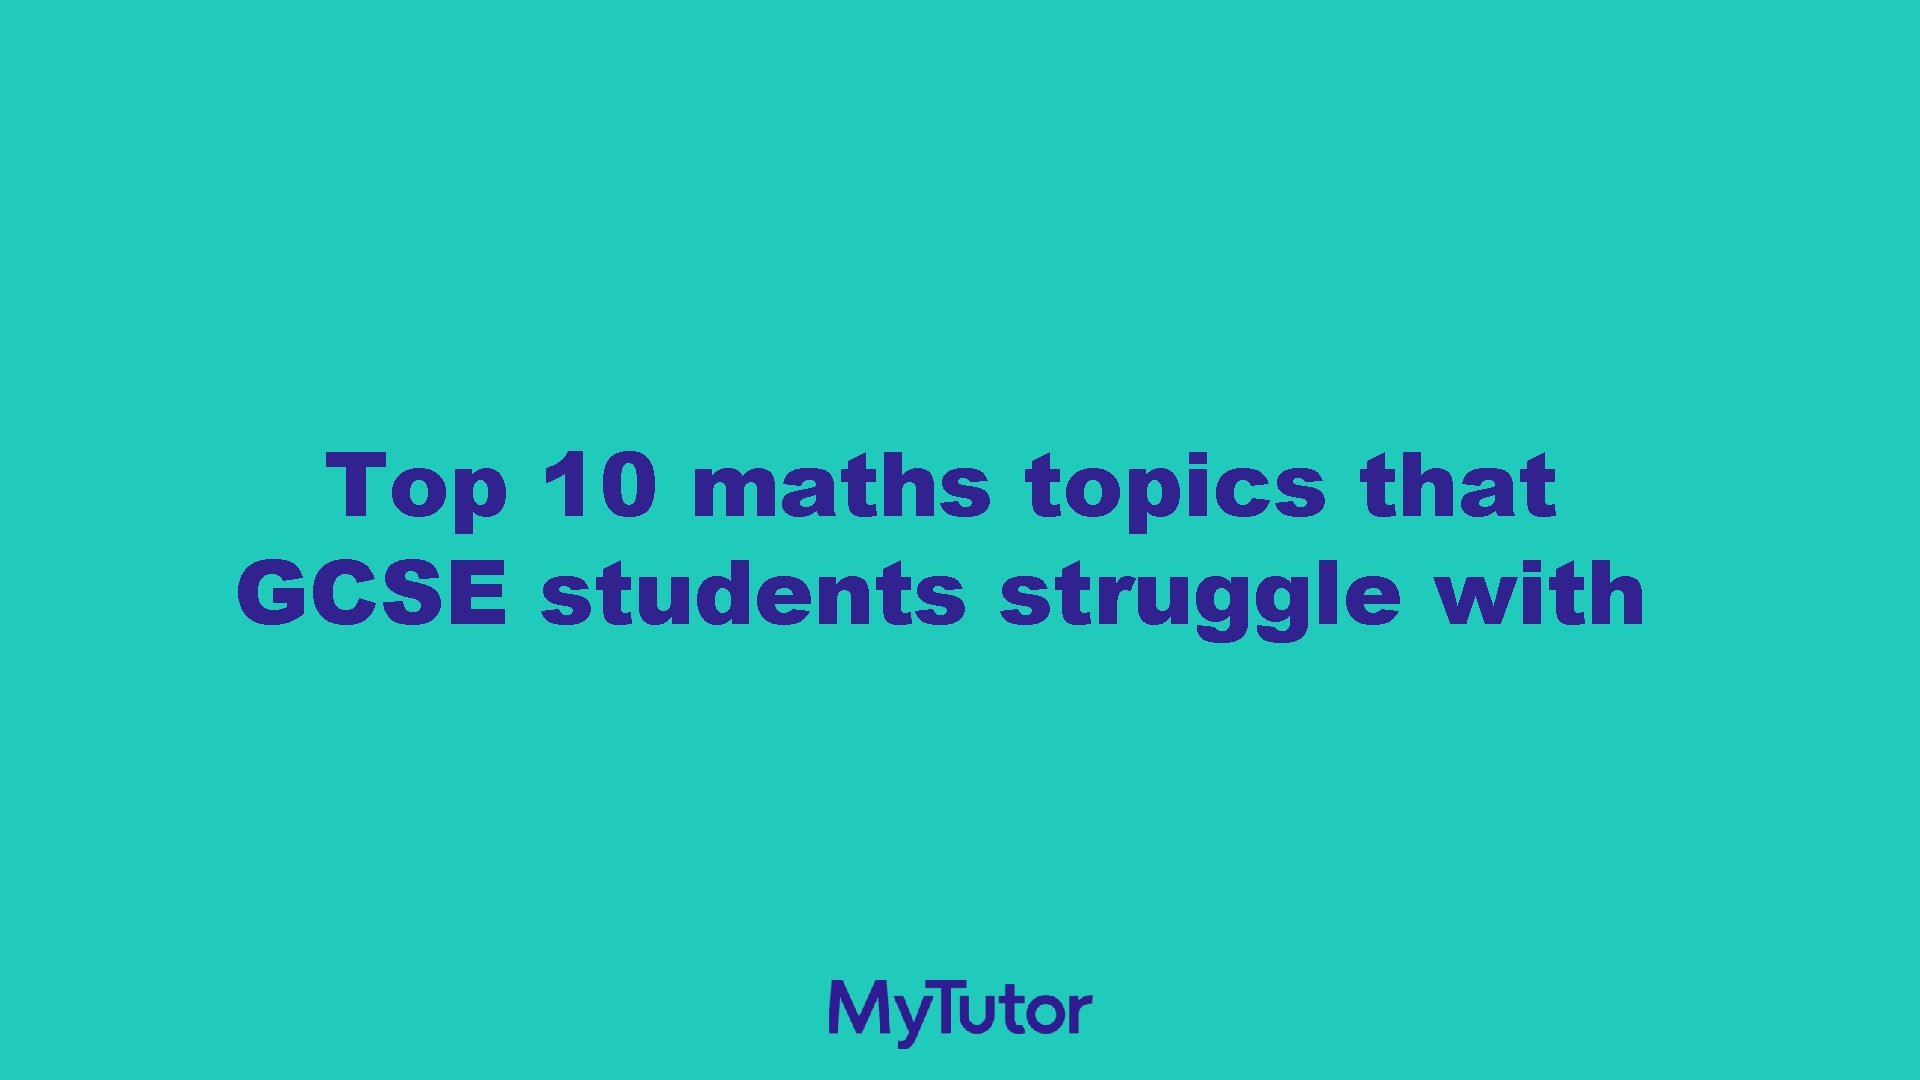 Top 10 maths topics that GCSE students struggle with 